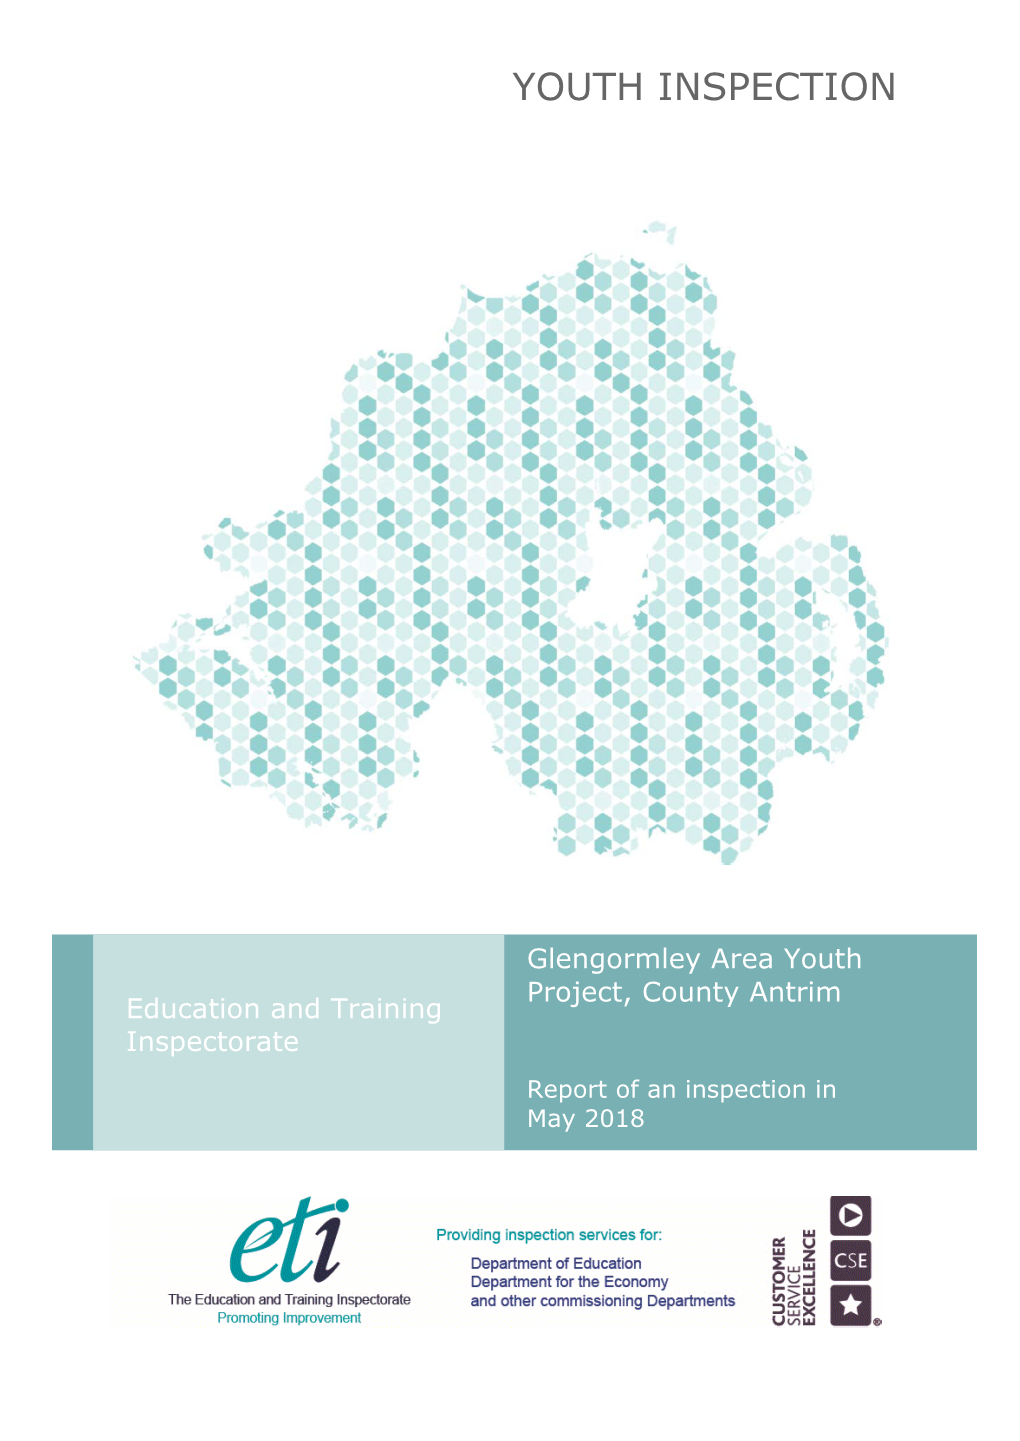 Glengormley Area Youth Project, County Antrim Education and Training